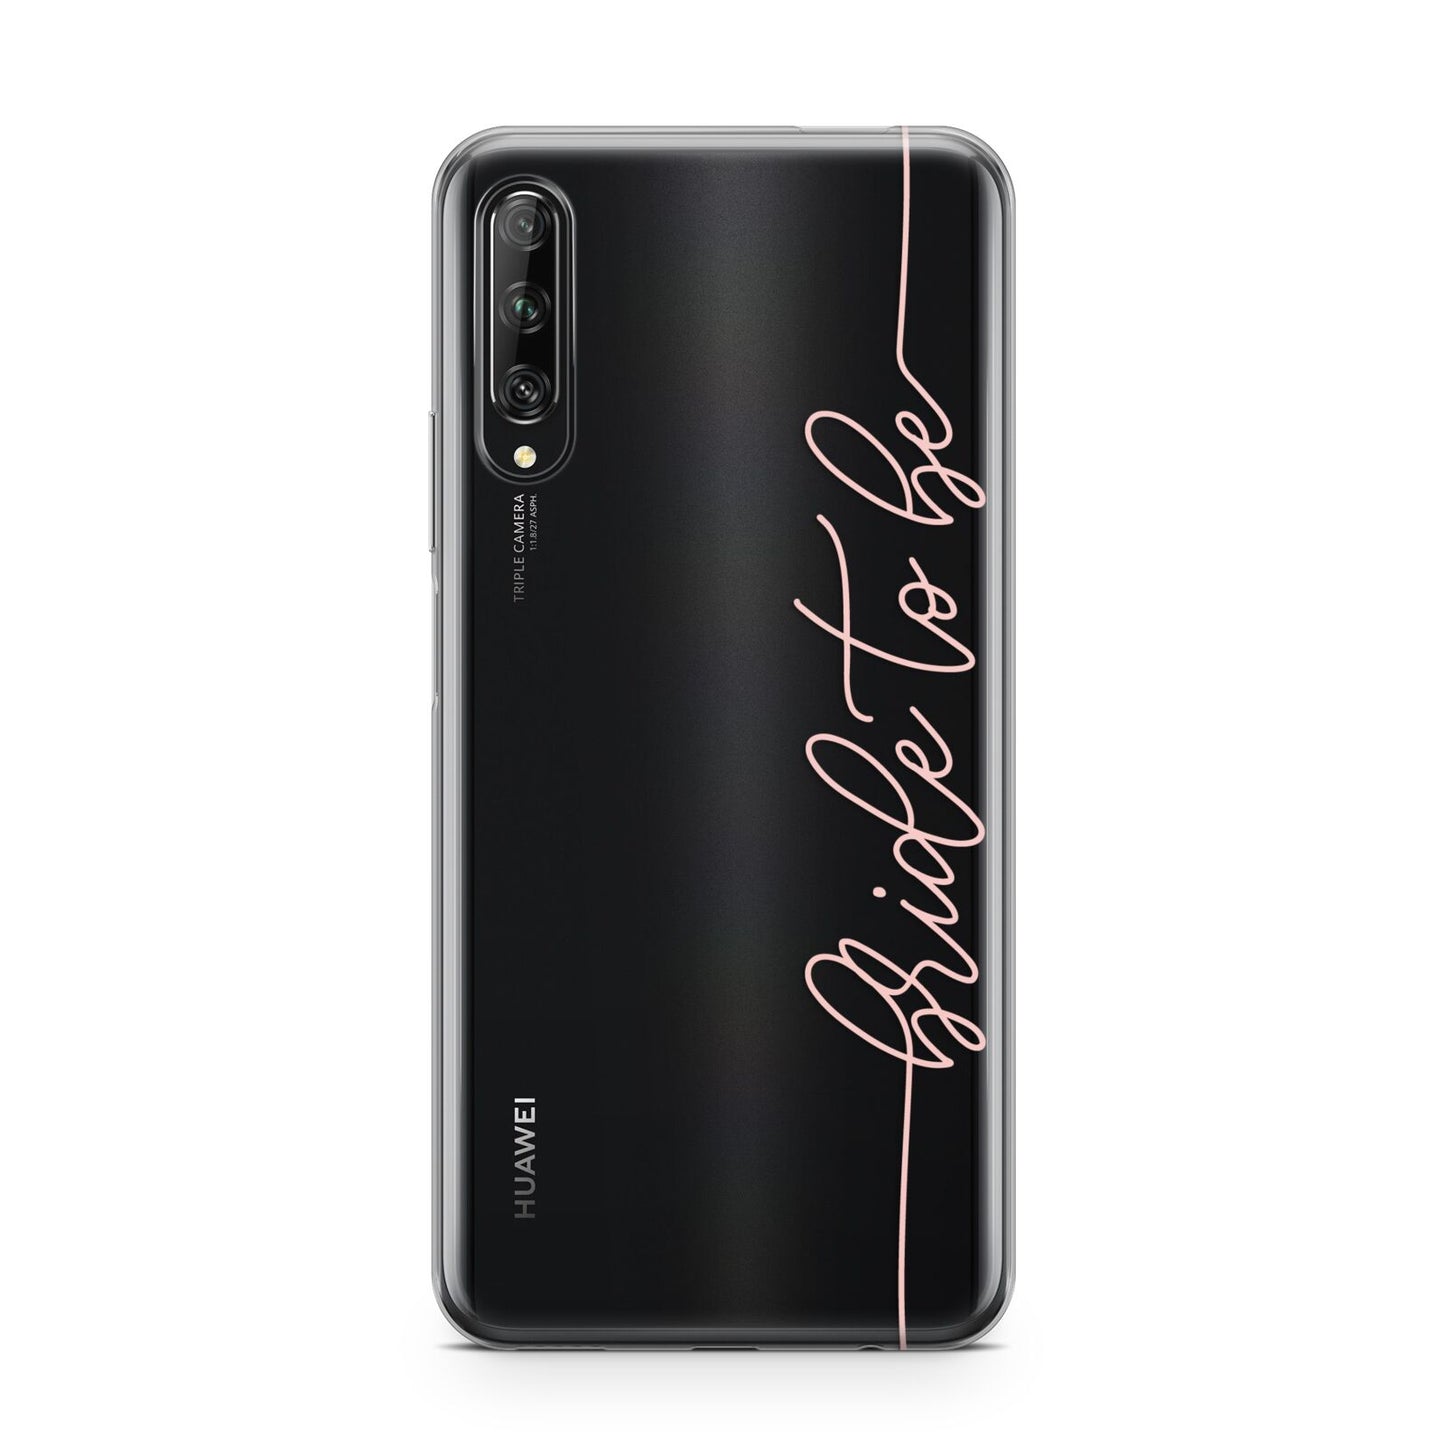 Bride To Be Huawei P Smart Pro 2019